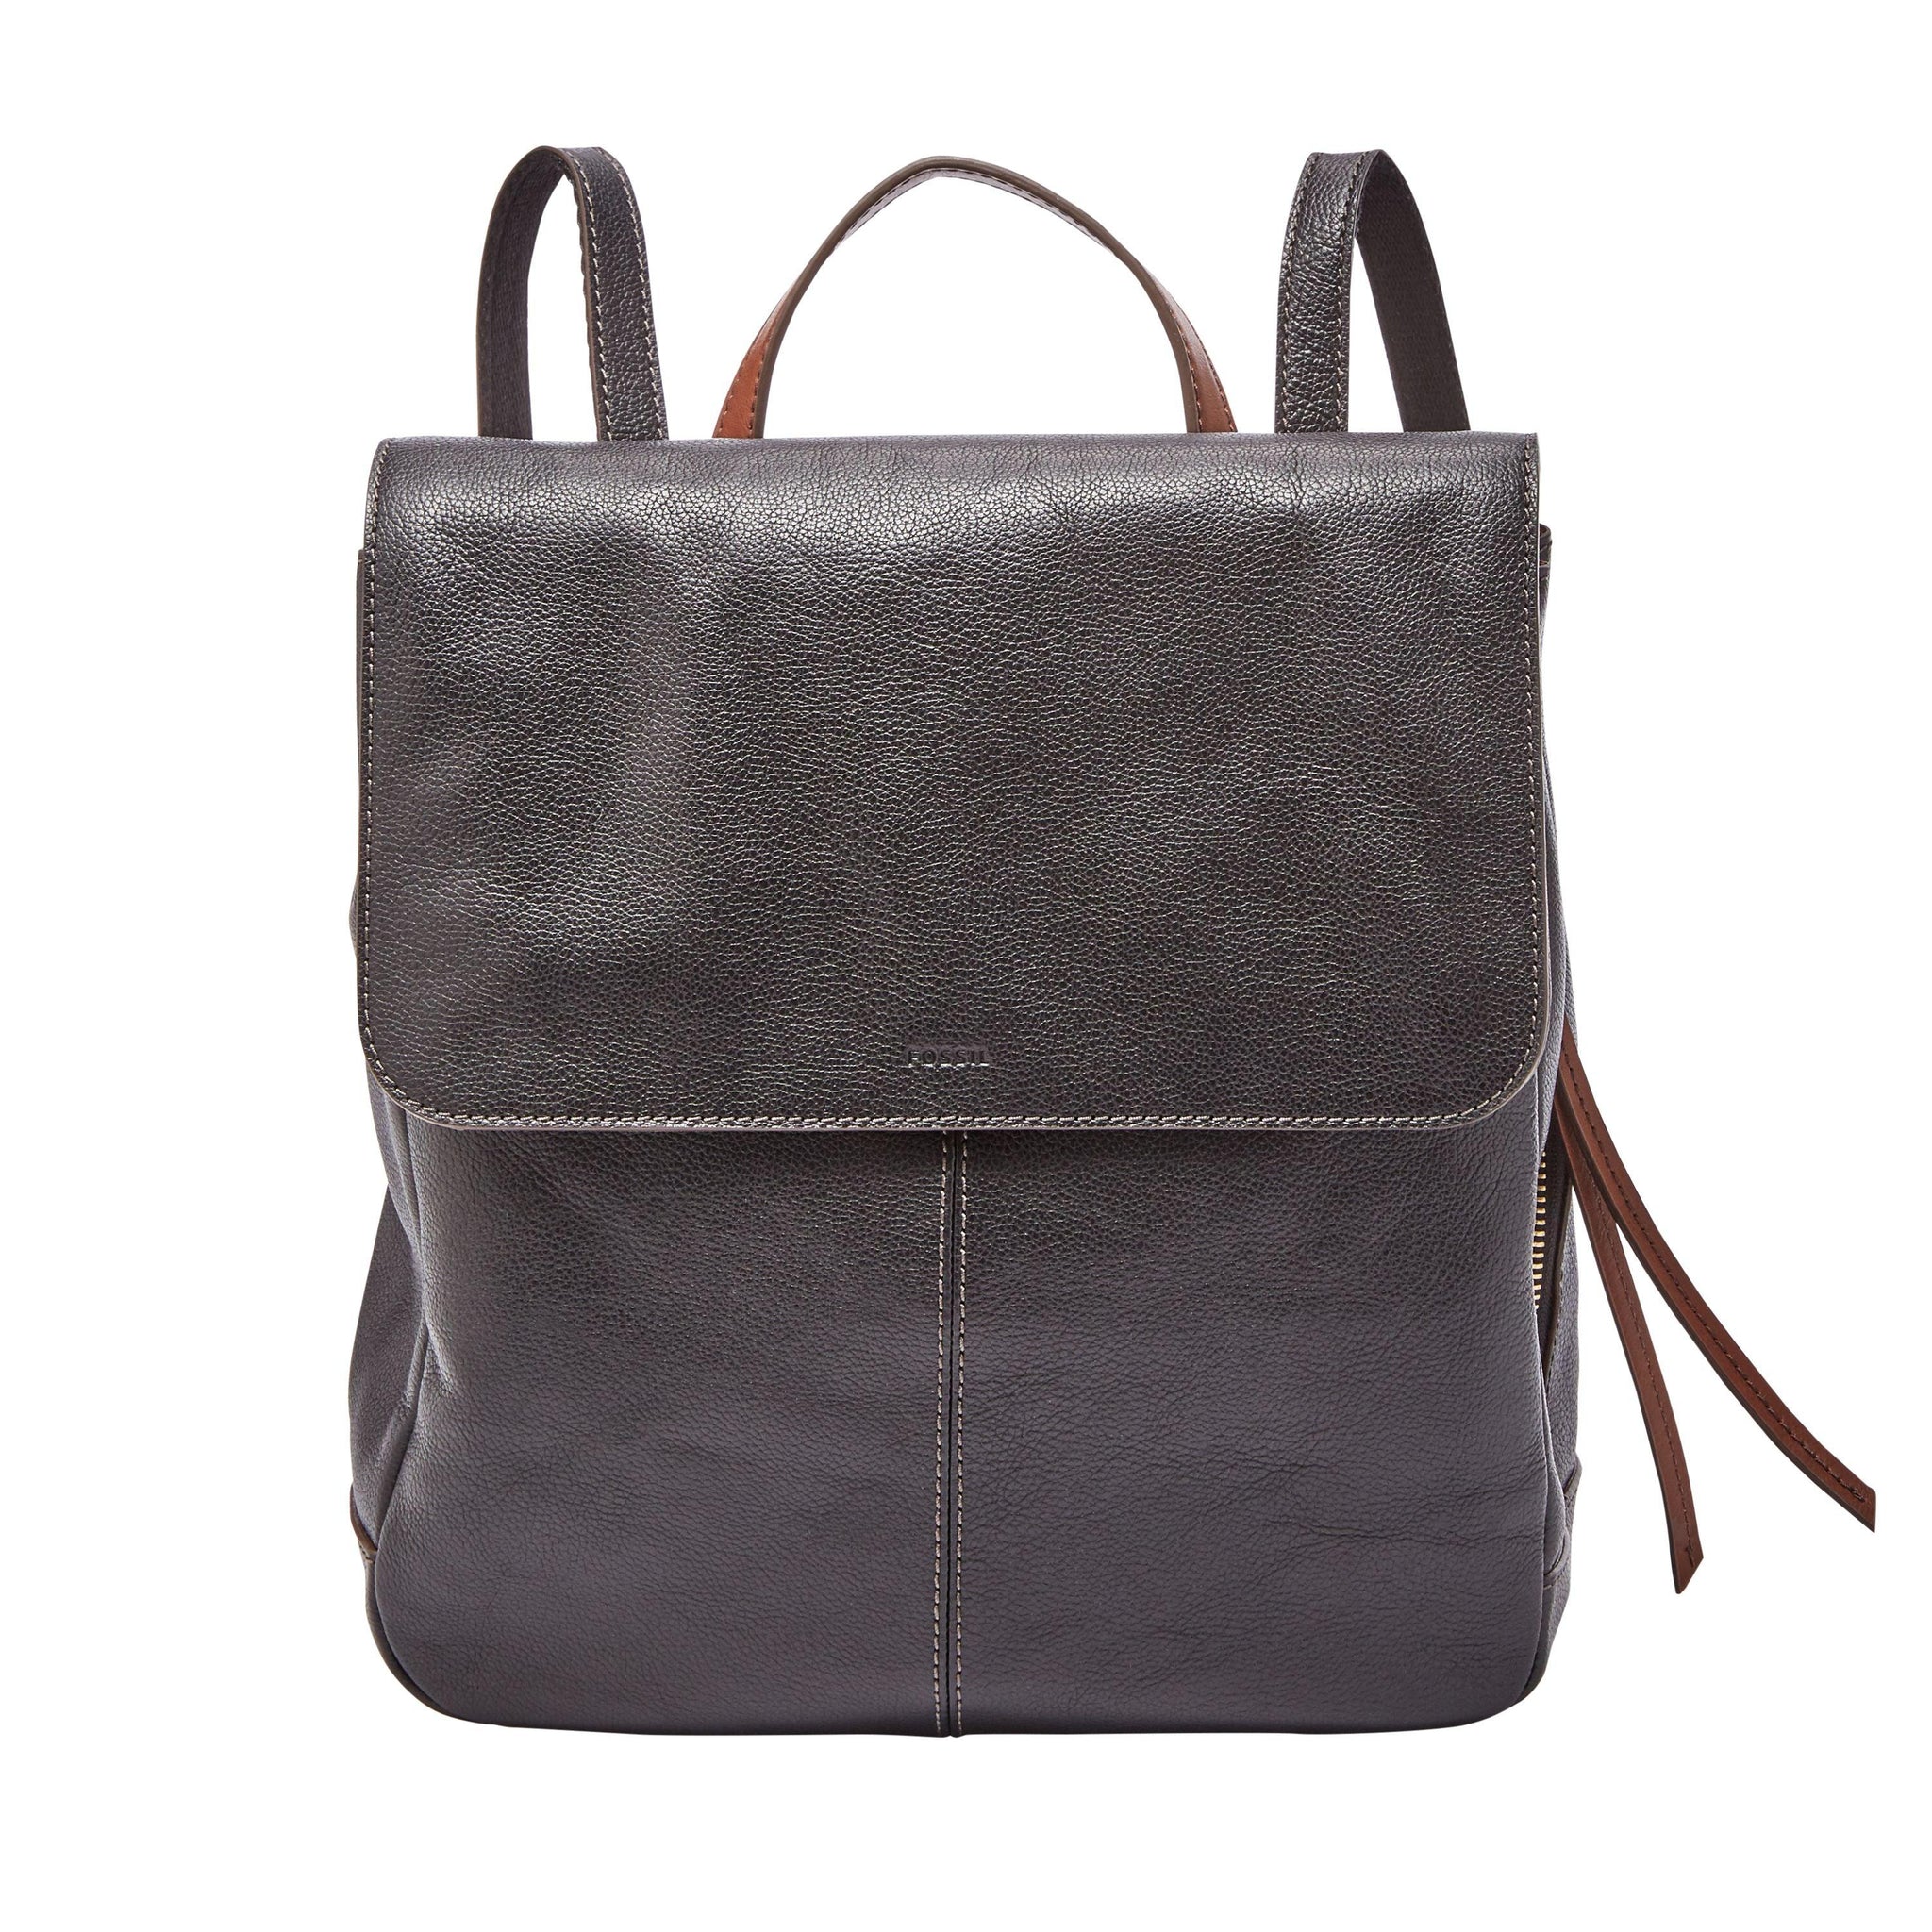 Fossil Women's Claire Leather Backpack - CADEAUME